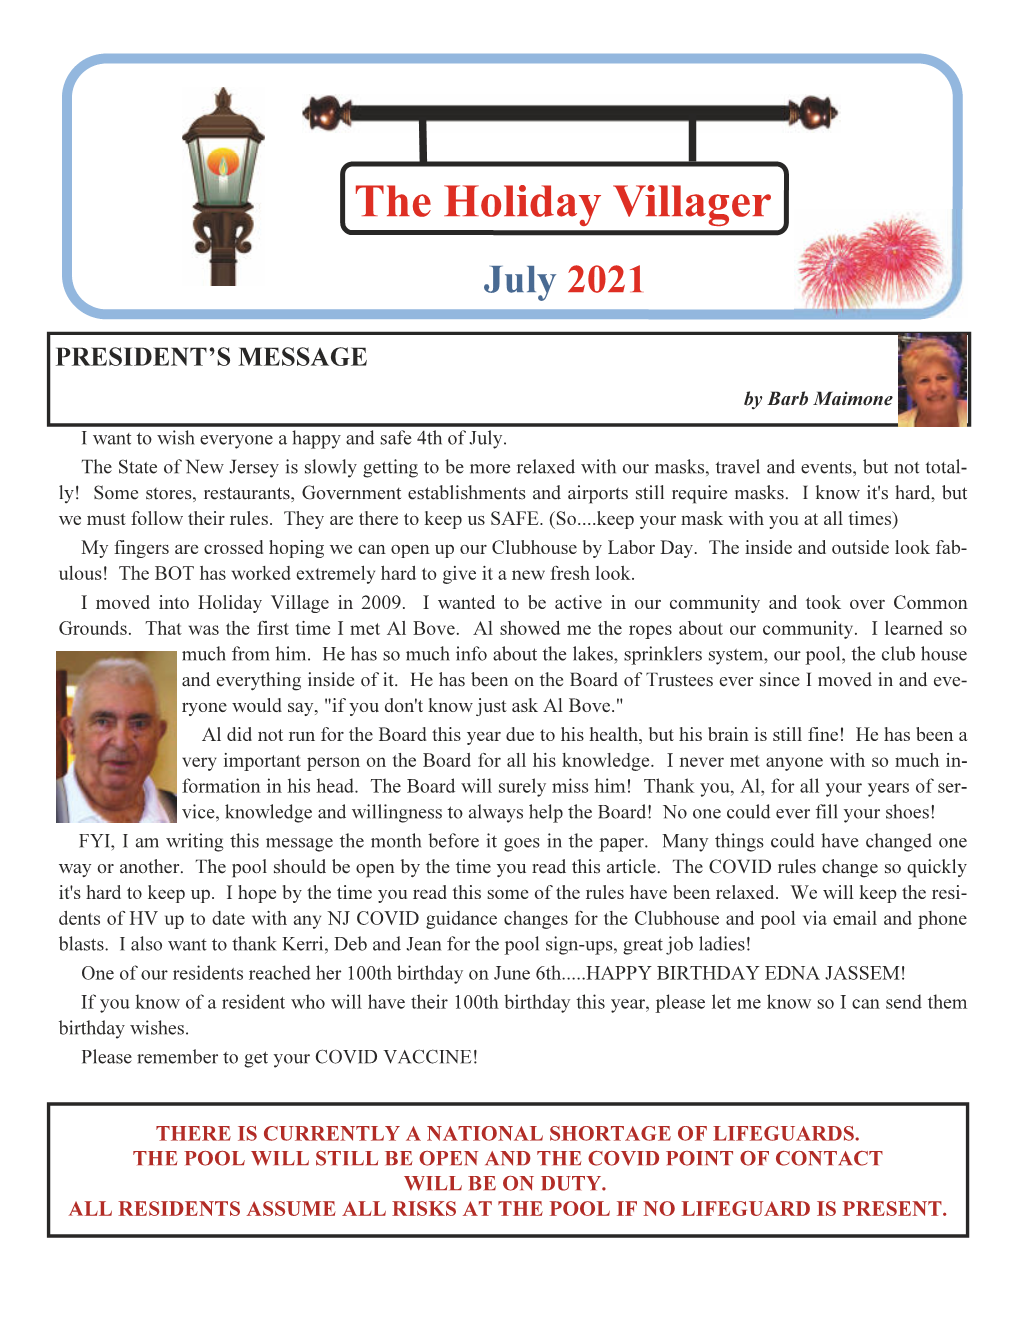 The Holiday Villager July 2021